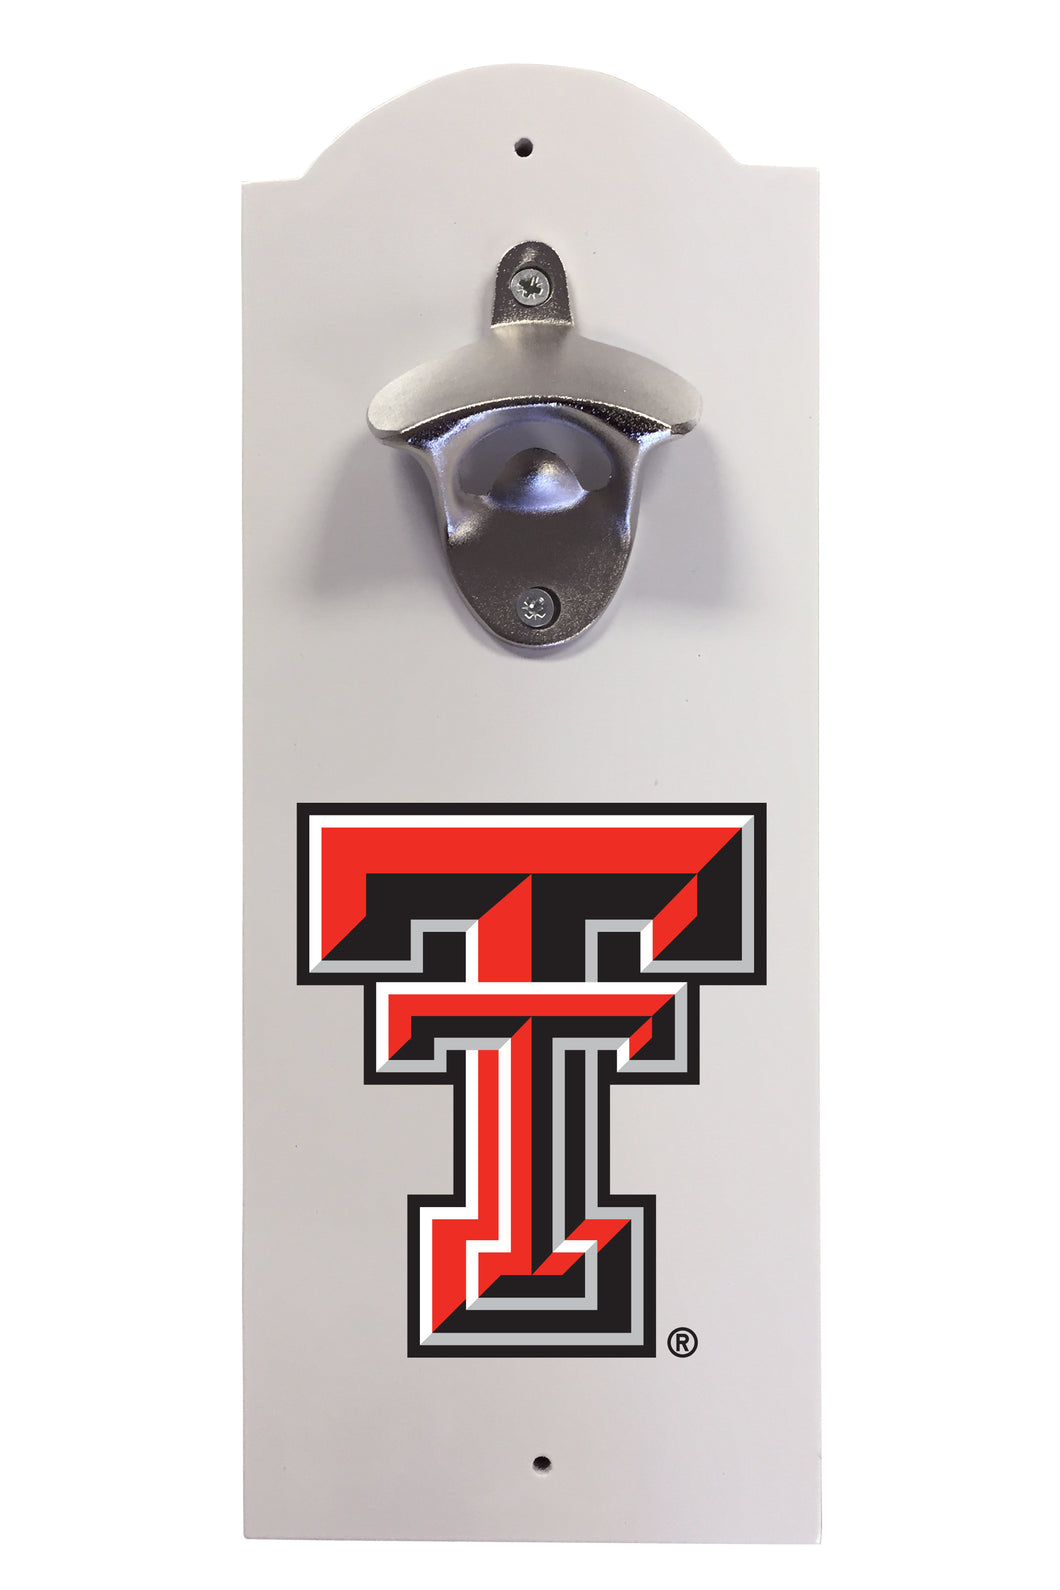 Texas Tech Red Raiders Wall-Mounted Bottle Opener – Sturdy Metal with Decorative Wood Base for Home Bars, Rec Rooms & Fan Caves